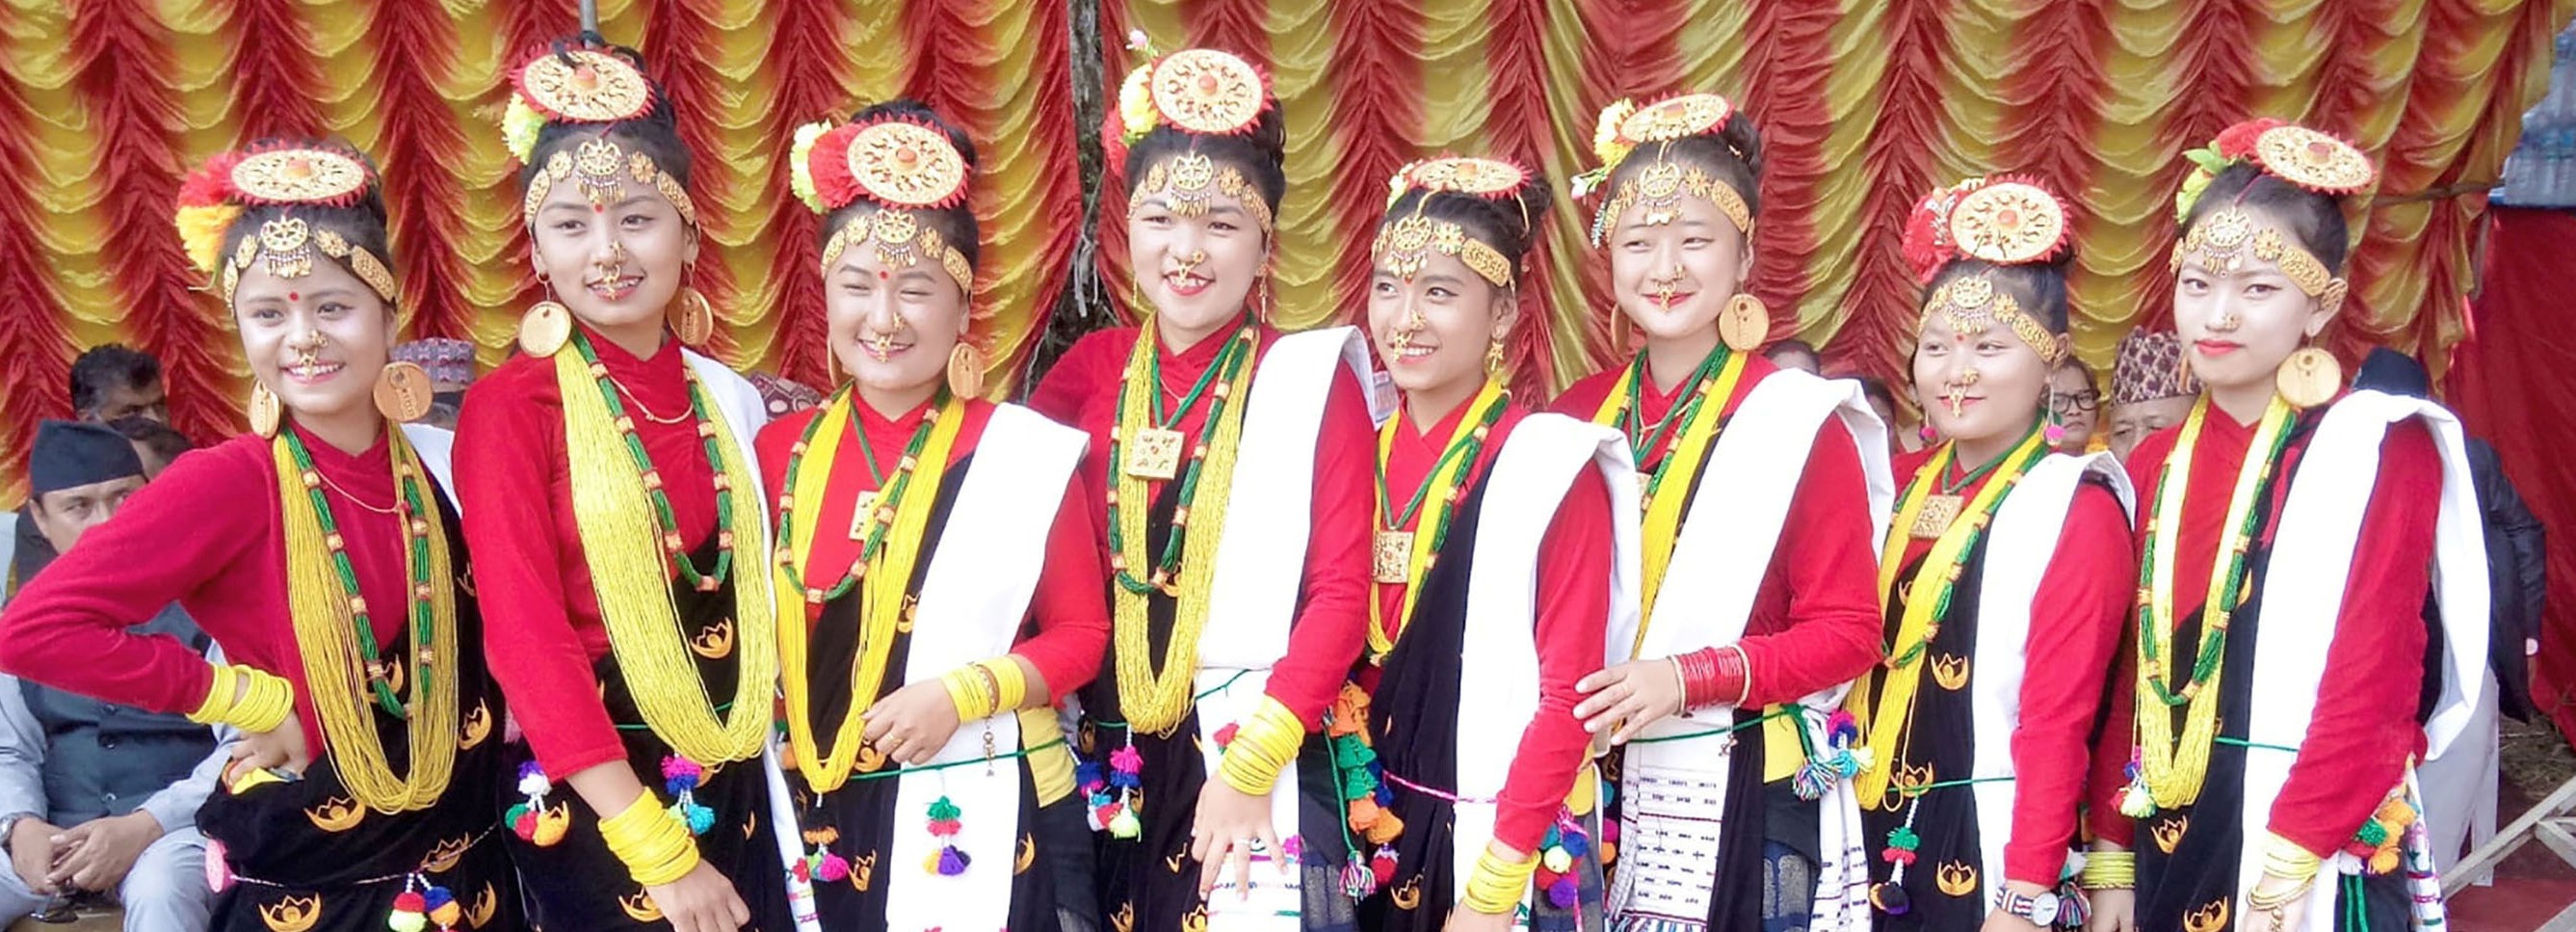 magar-women-in-their-cultural-attire-are-posing-for-photo-at-damauli-in-tanahun